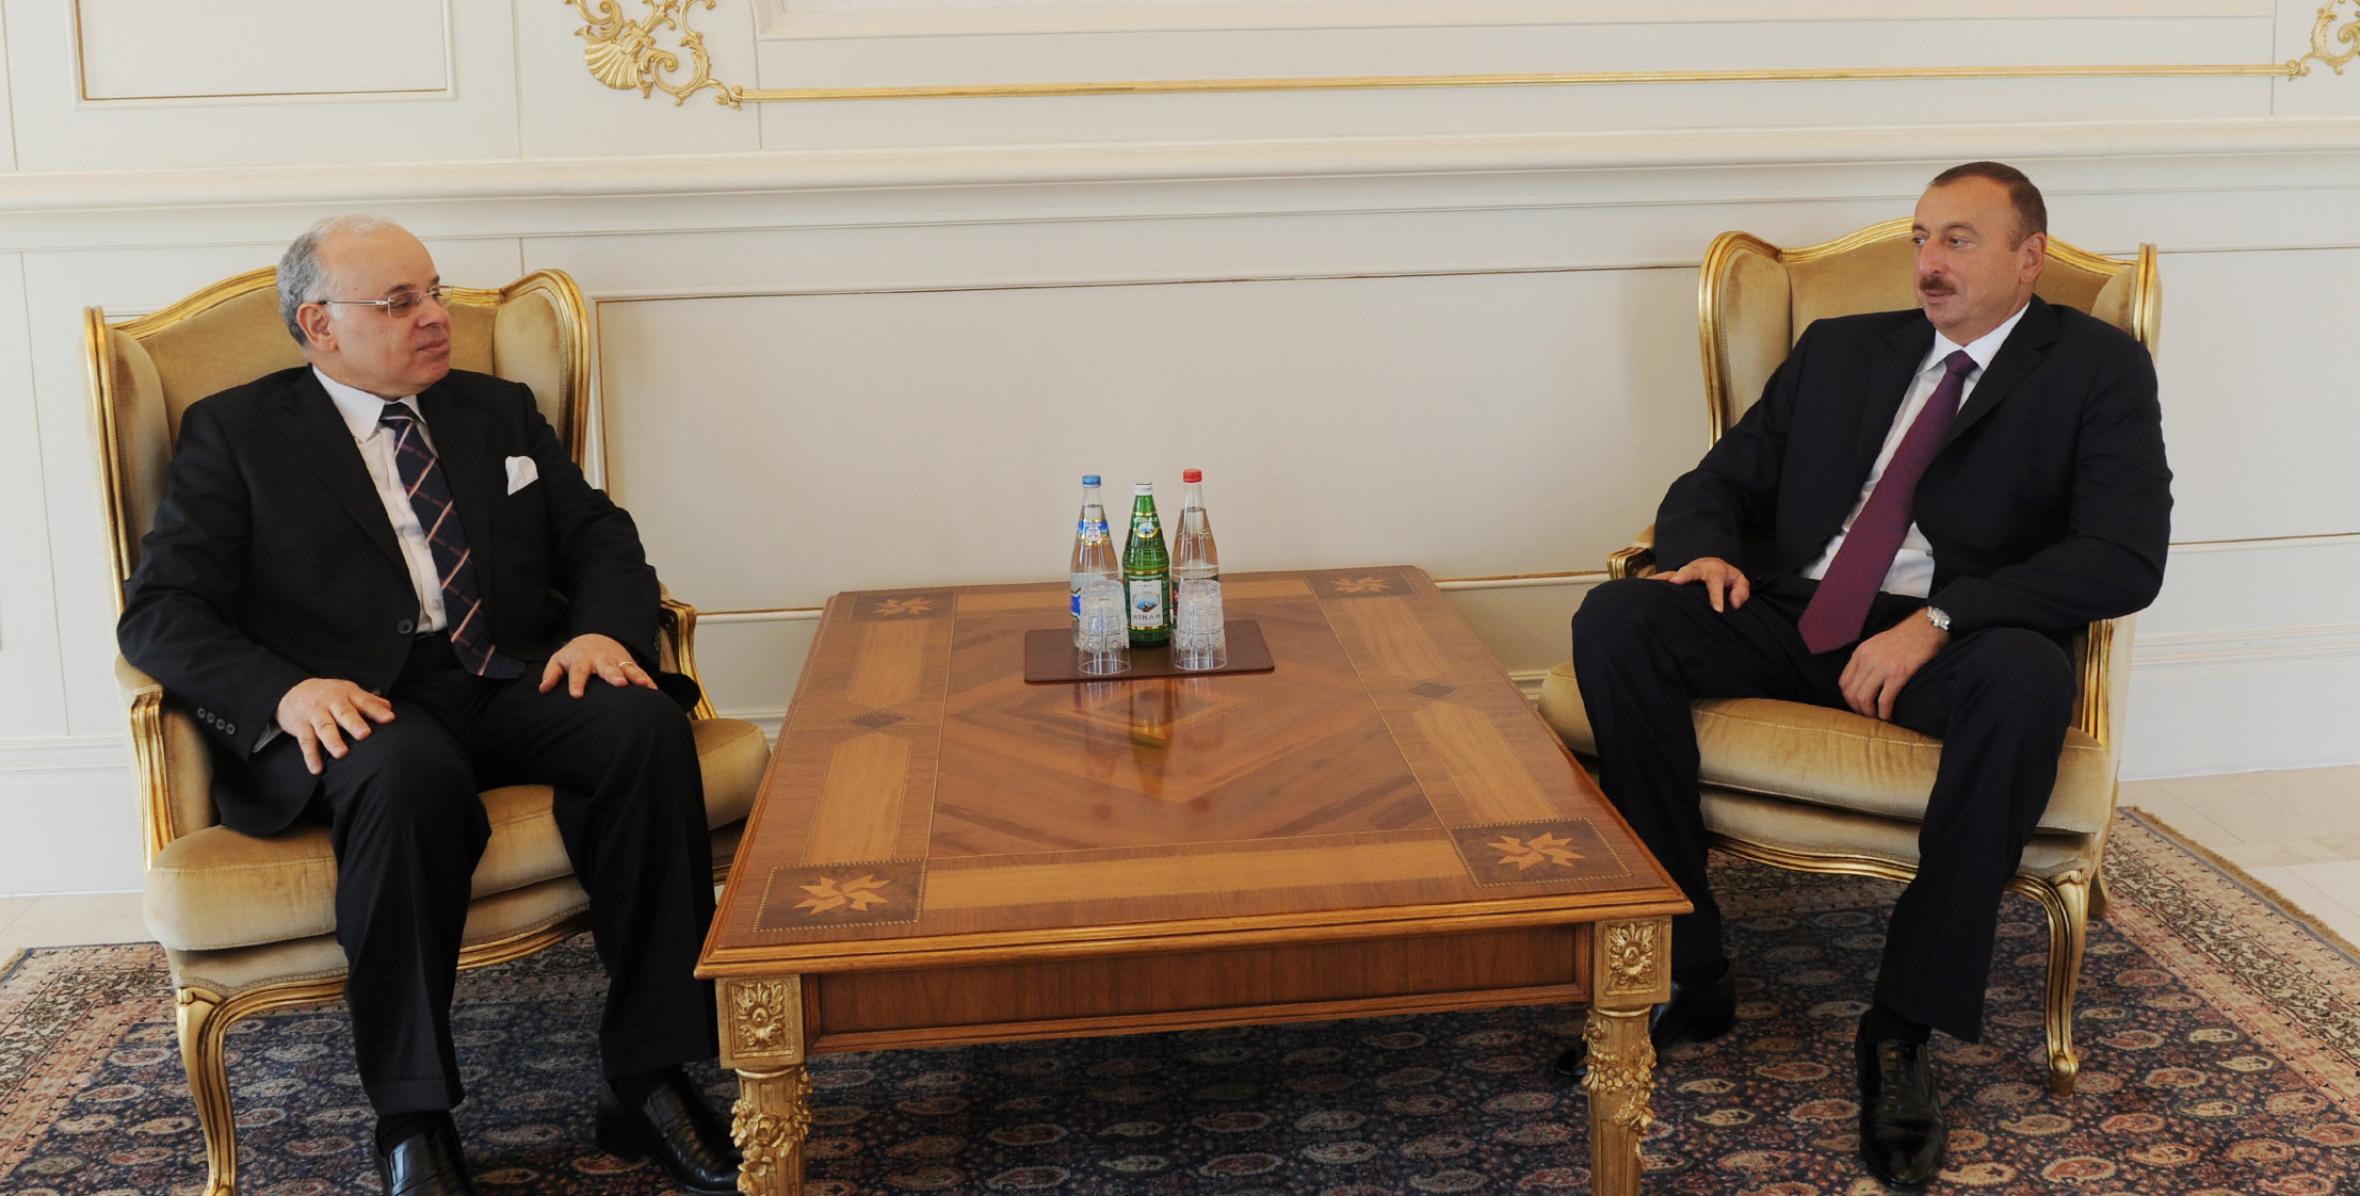 Ilham Aliyev received the outgoing ambassador of Egypt to Azerbaijan at the end of his diplomatic mission in the country